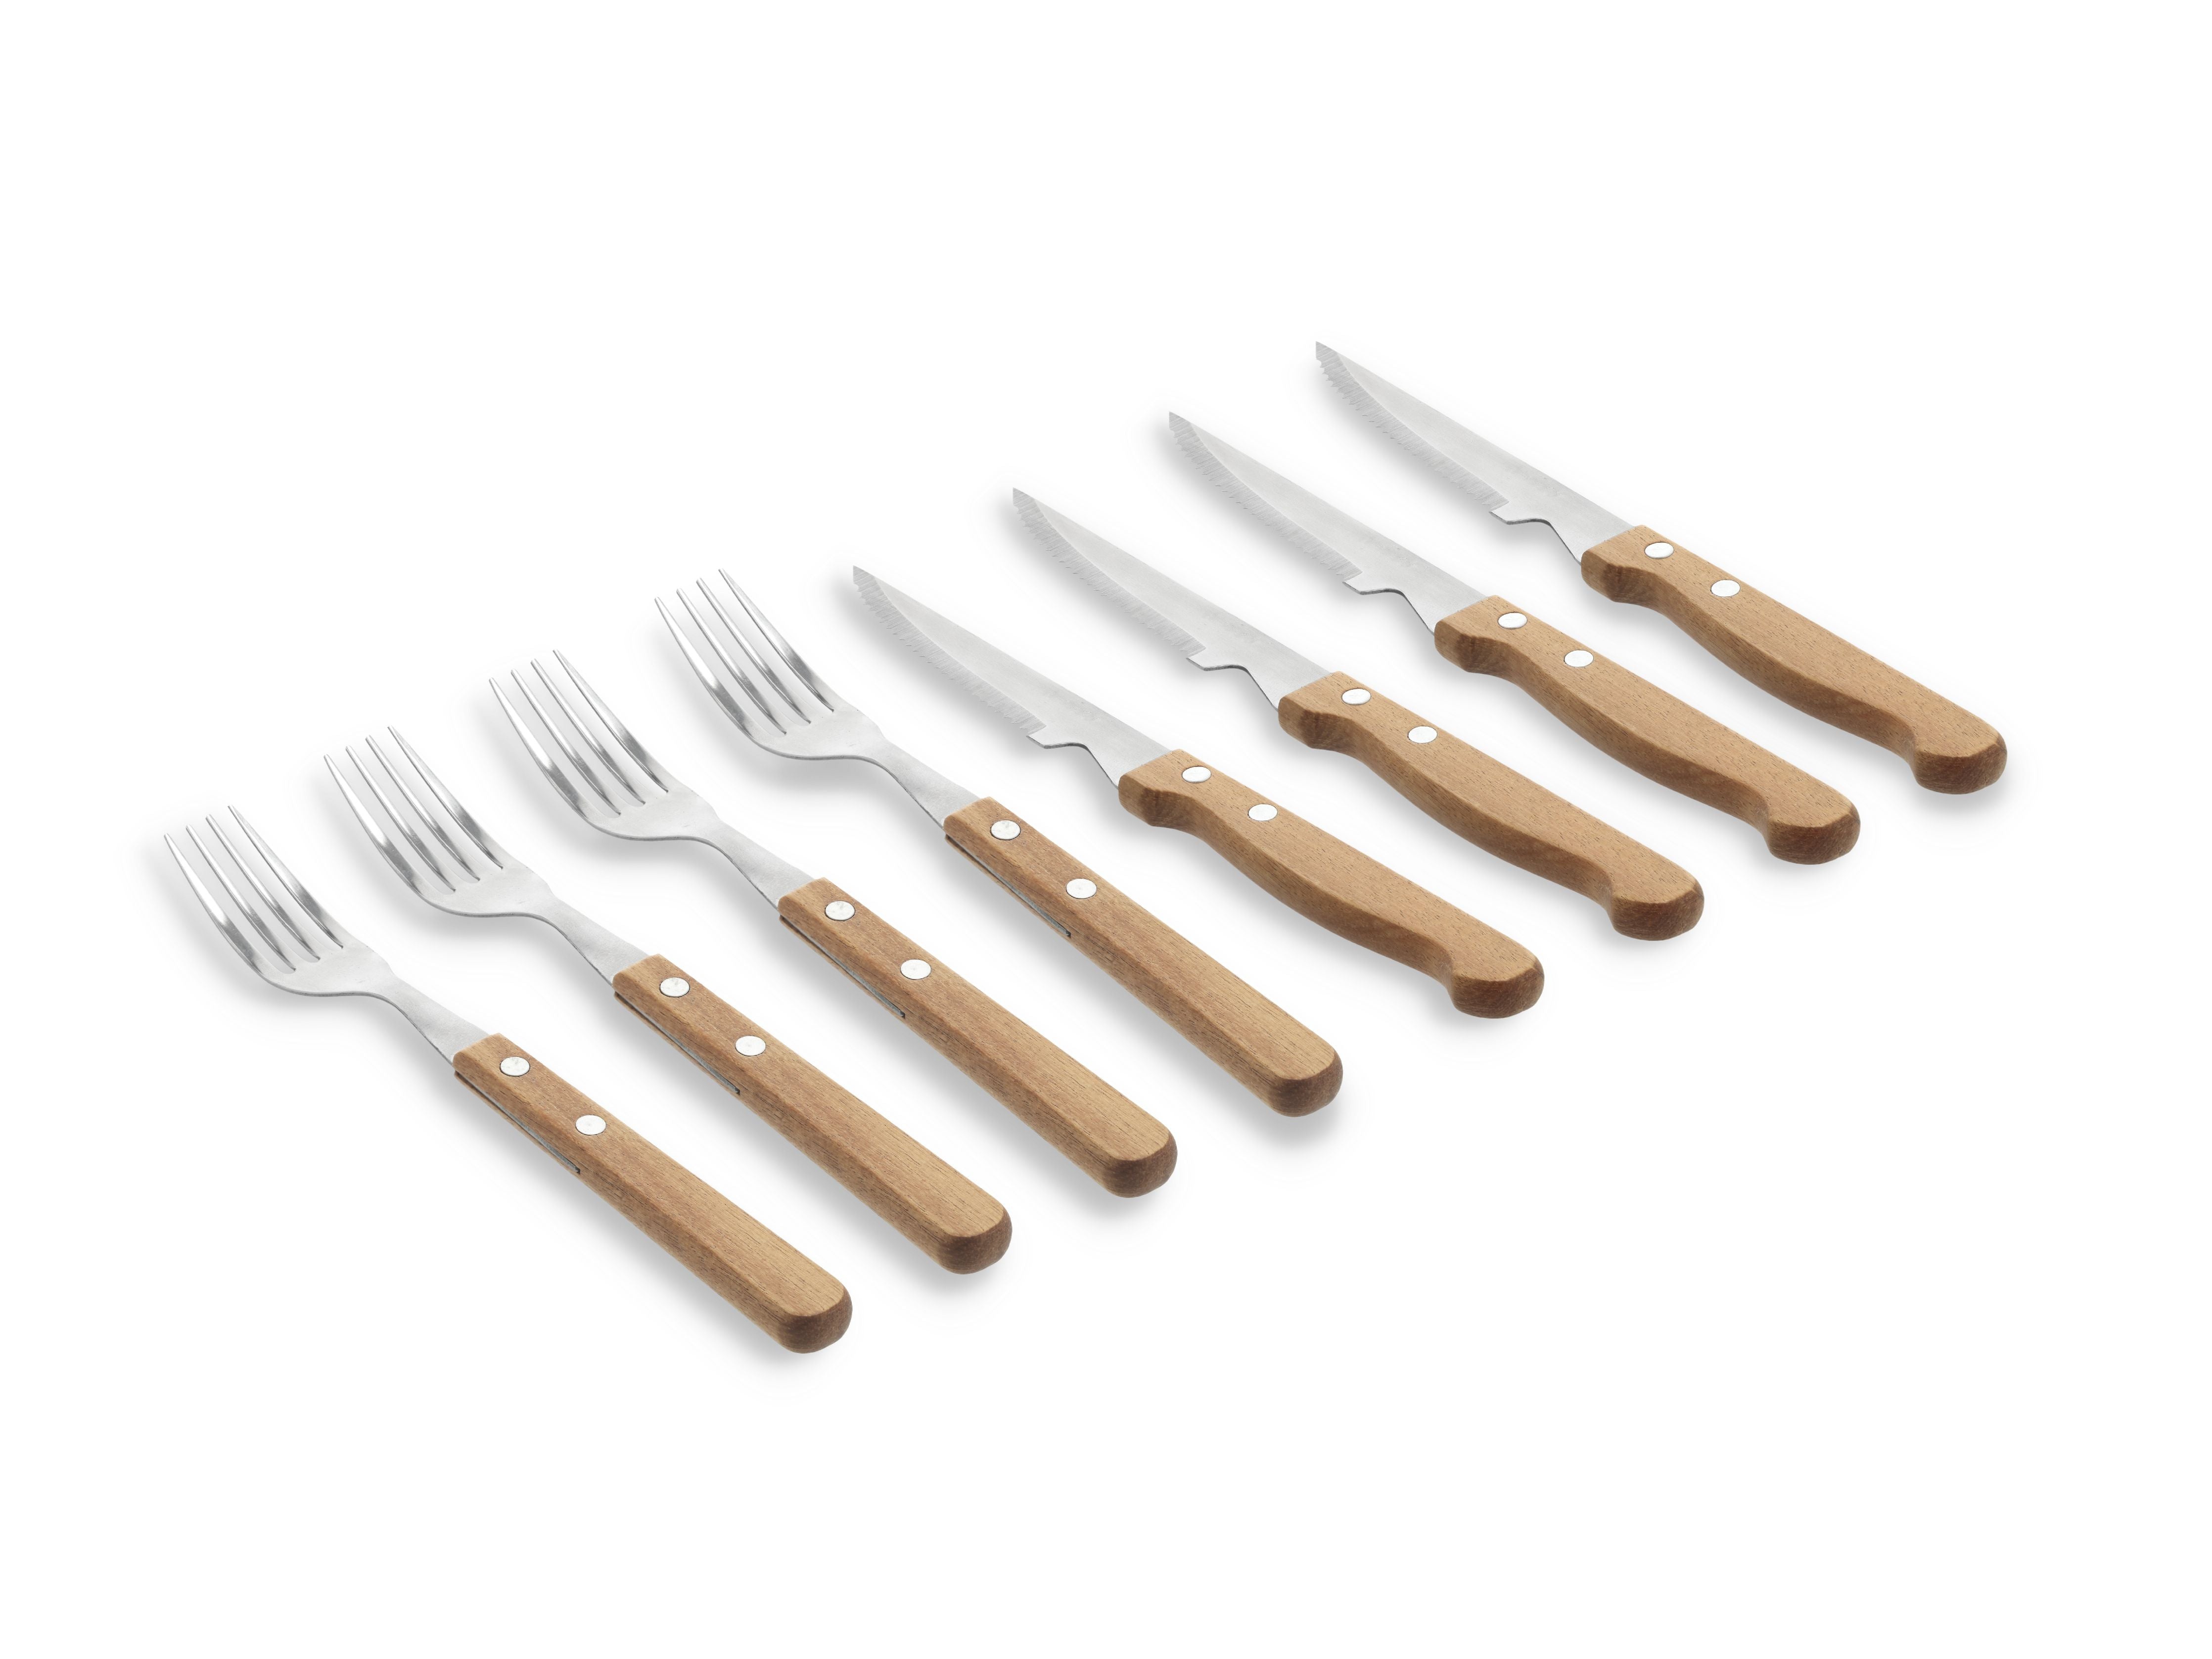 Six Holm Steak Cutlery Set With 8 Pieces on a white background.